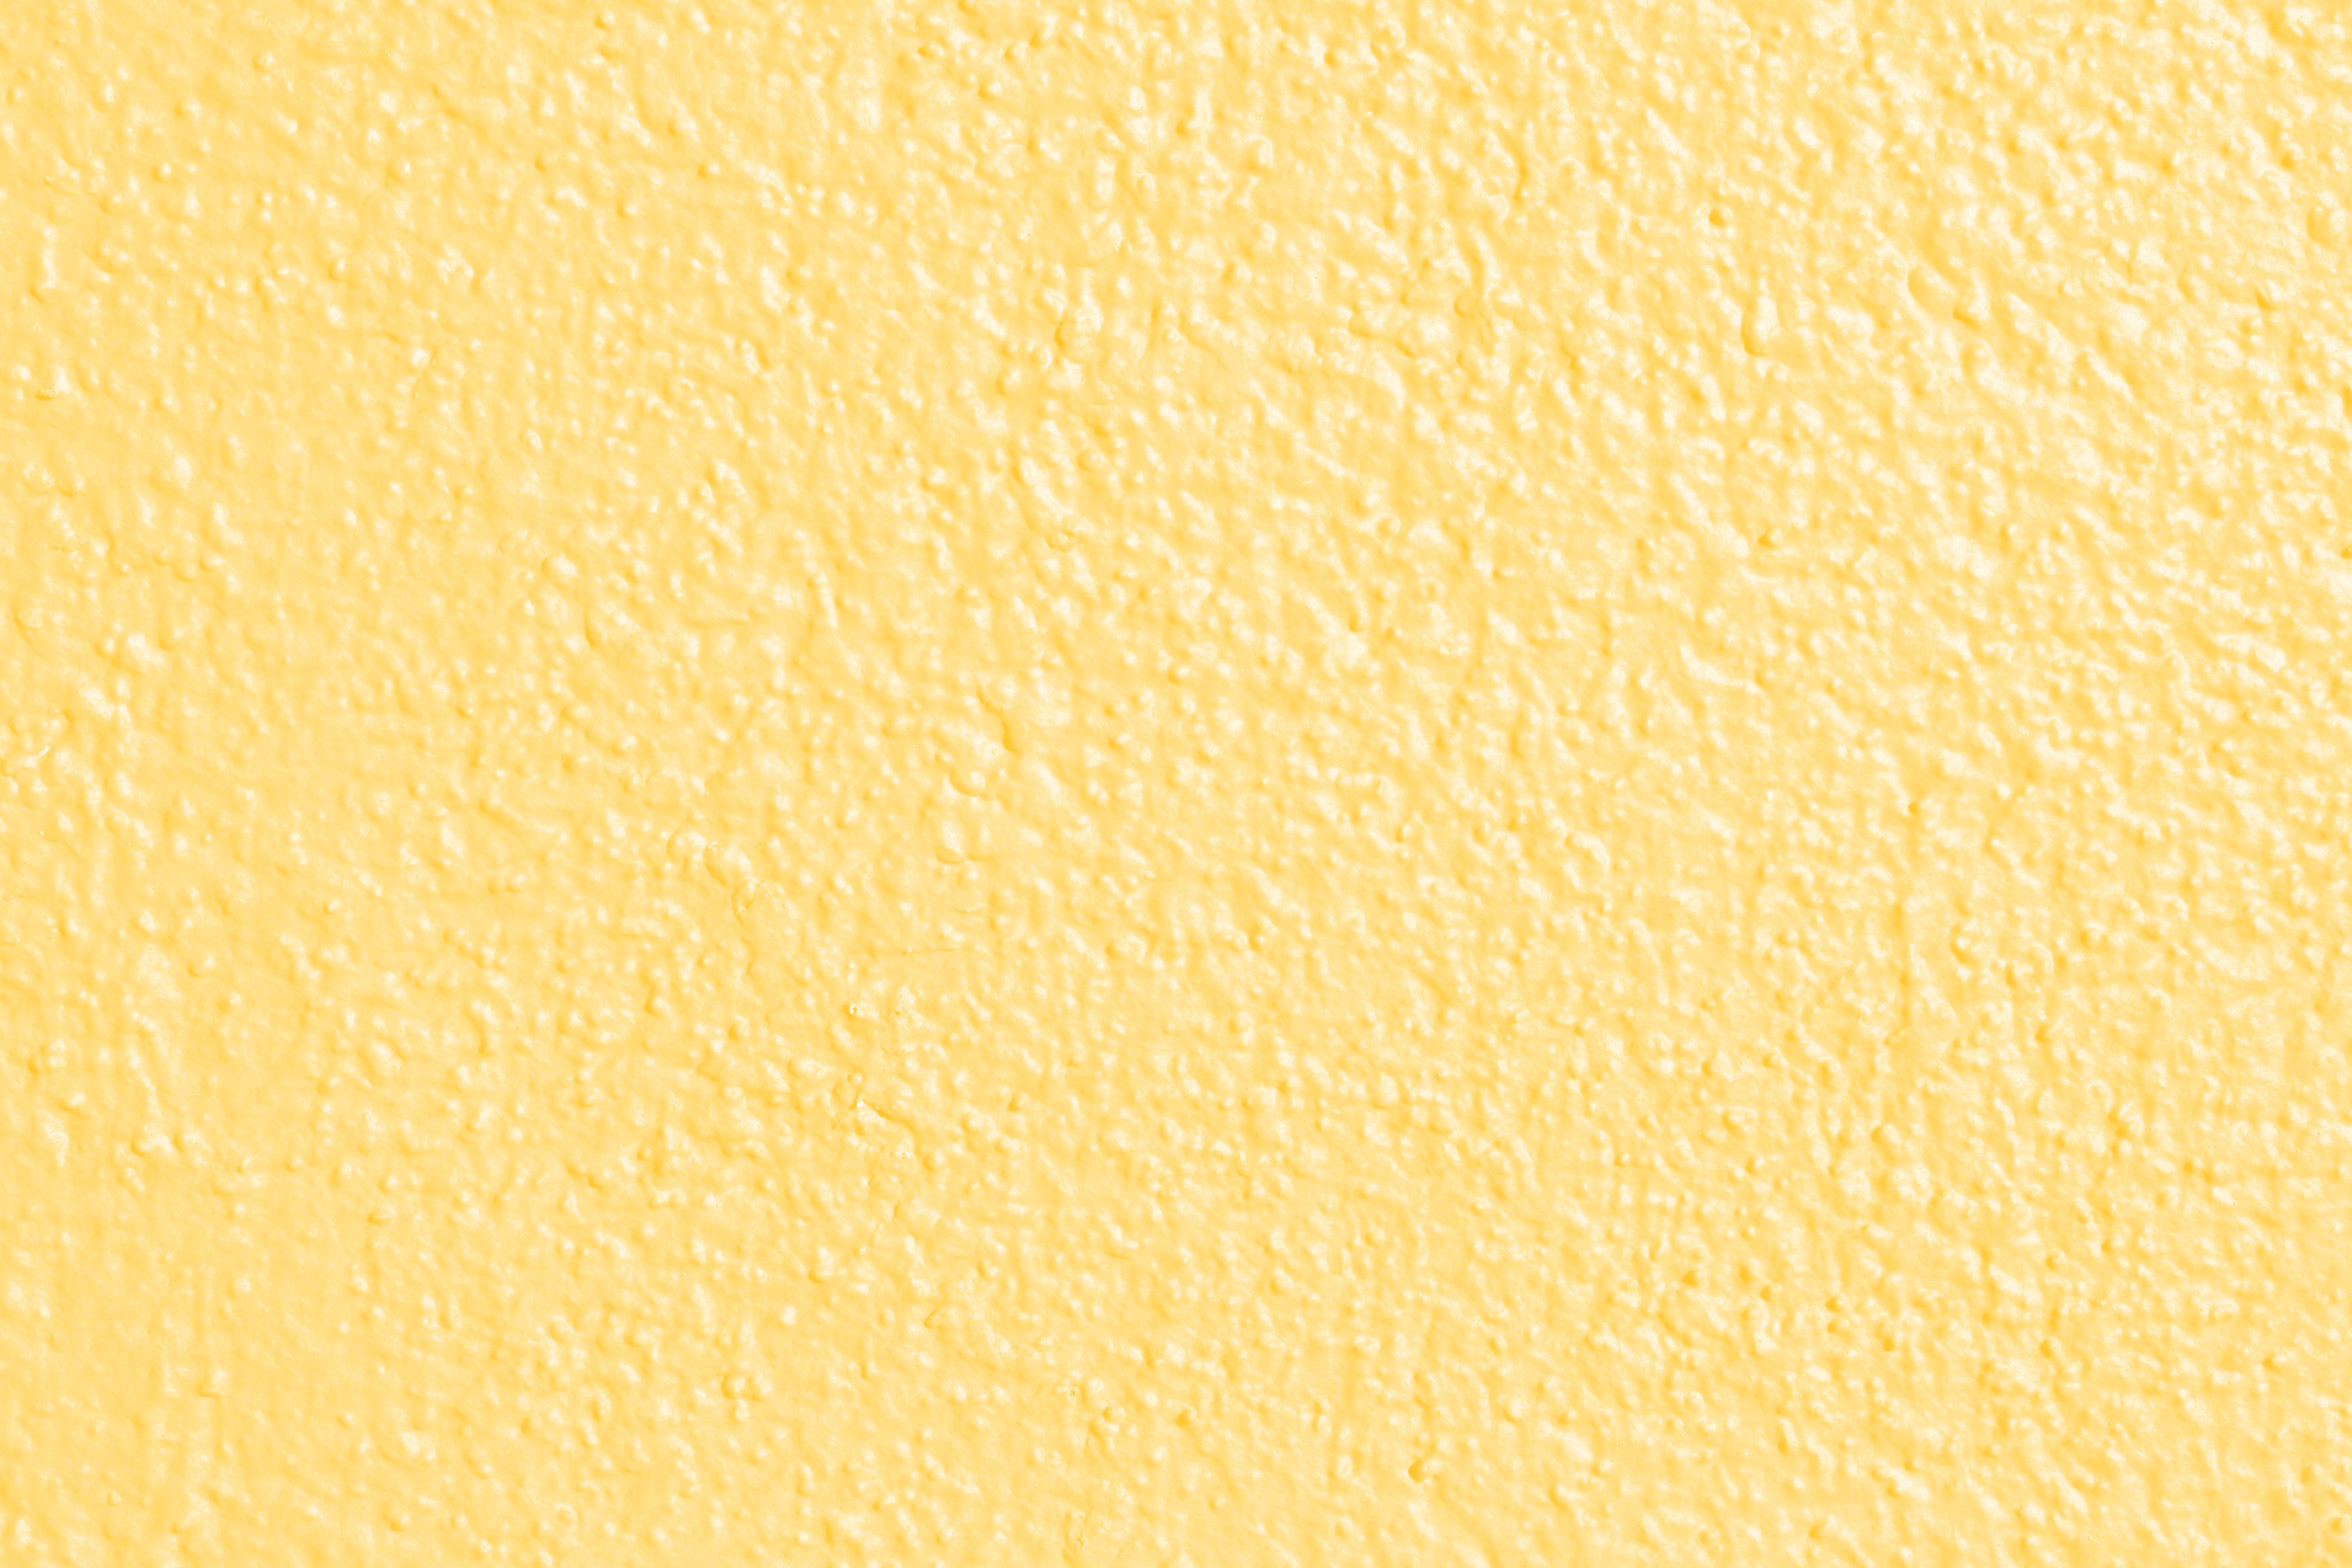 Marigold or Butterscotch Colored Painted Wall Texture Picture | Free ...